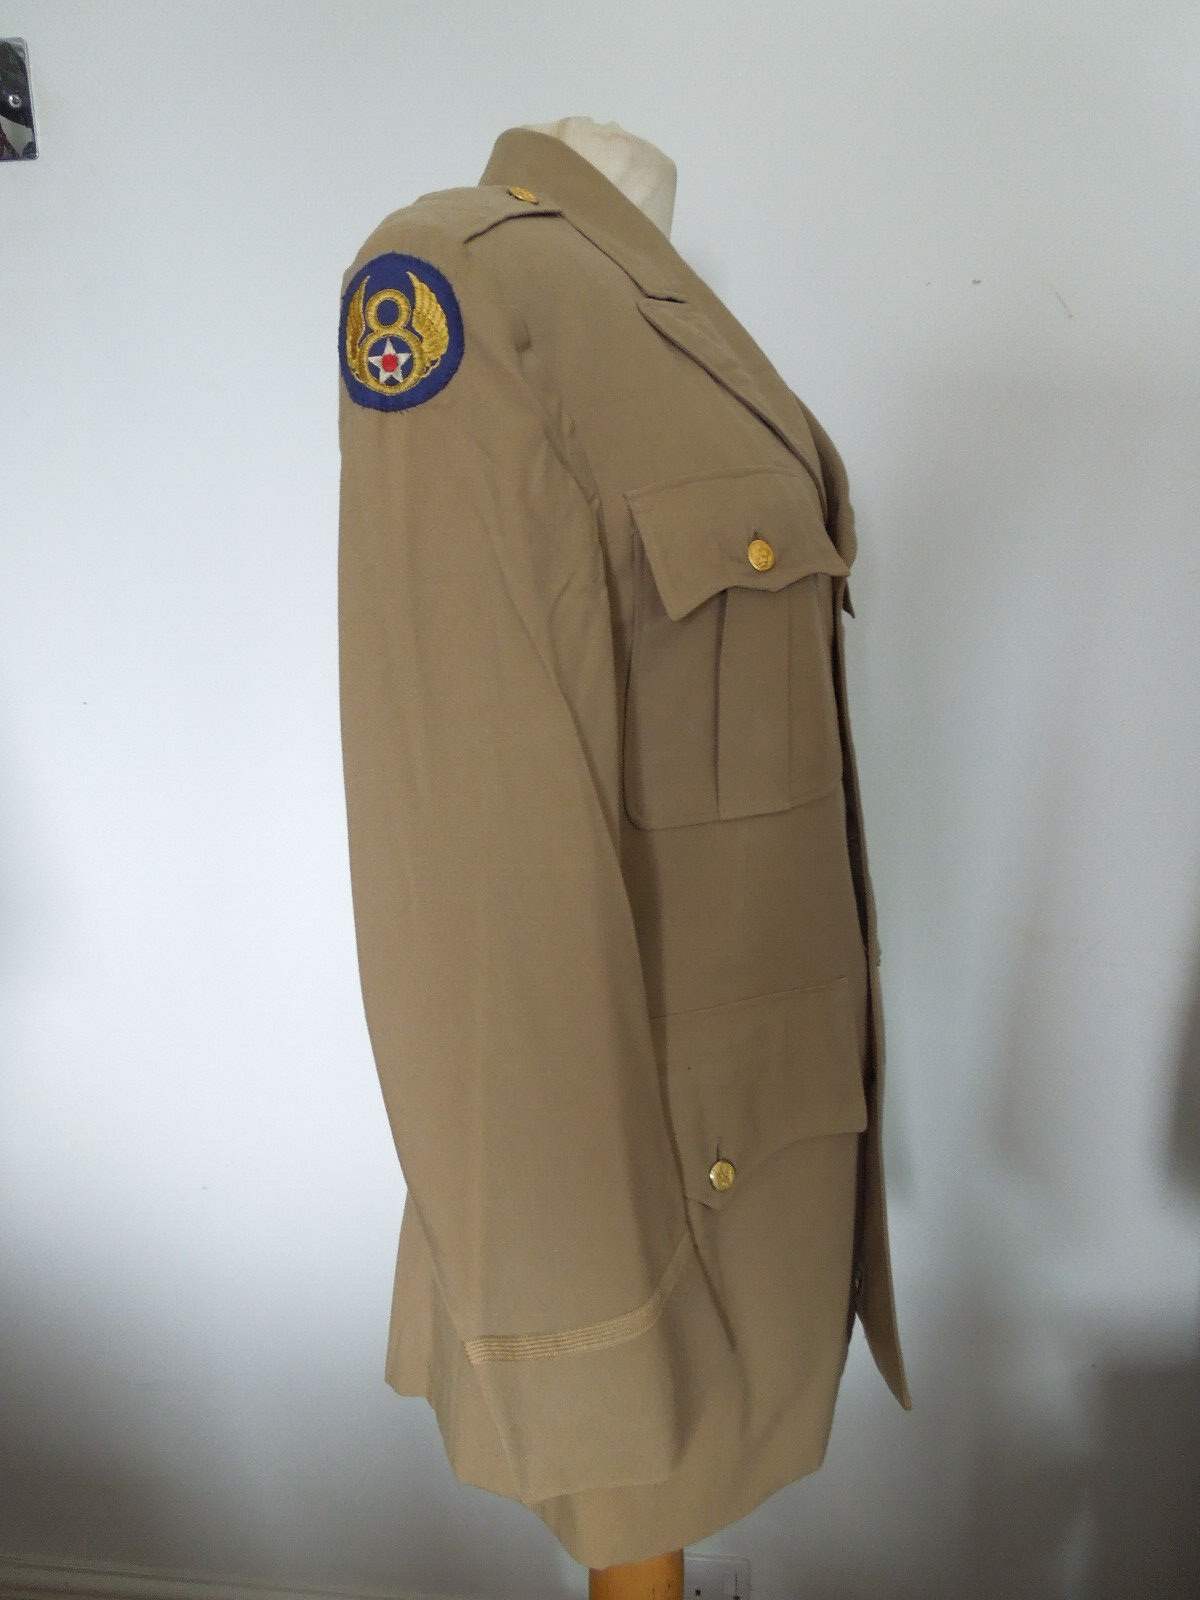 Vintage WWII US Army Reenactment Class A Summer Uniform Tunic USAAF Mighty 8th